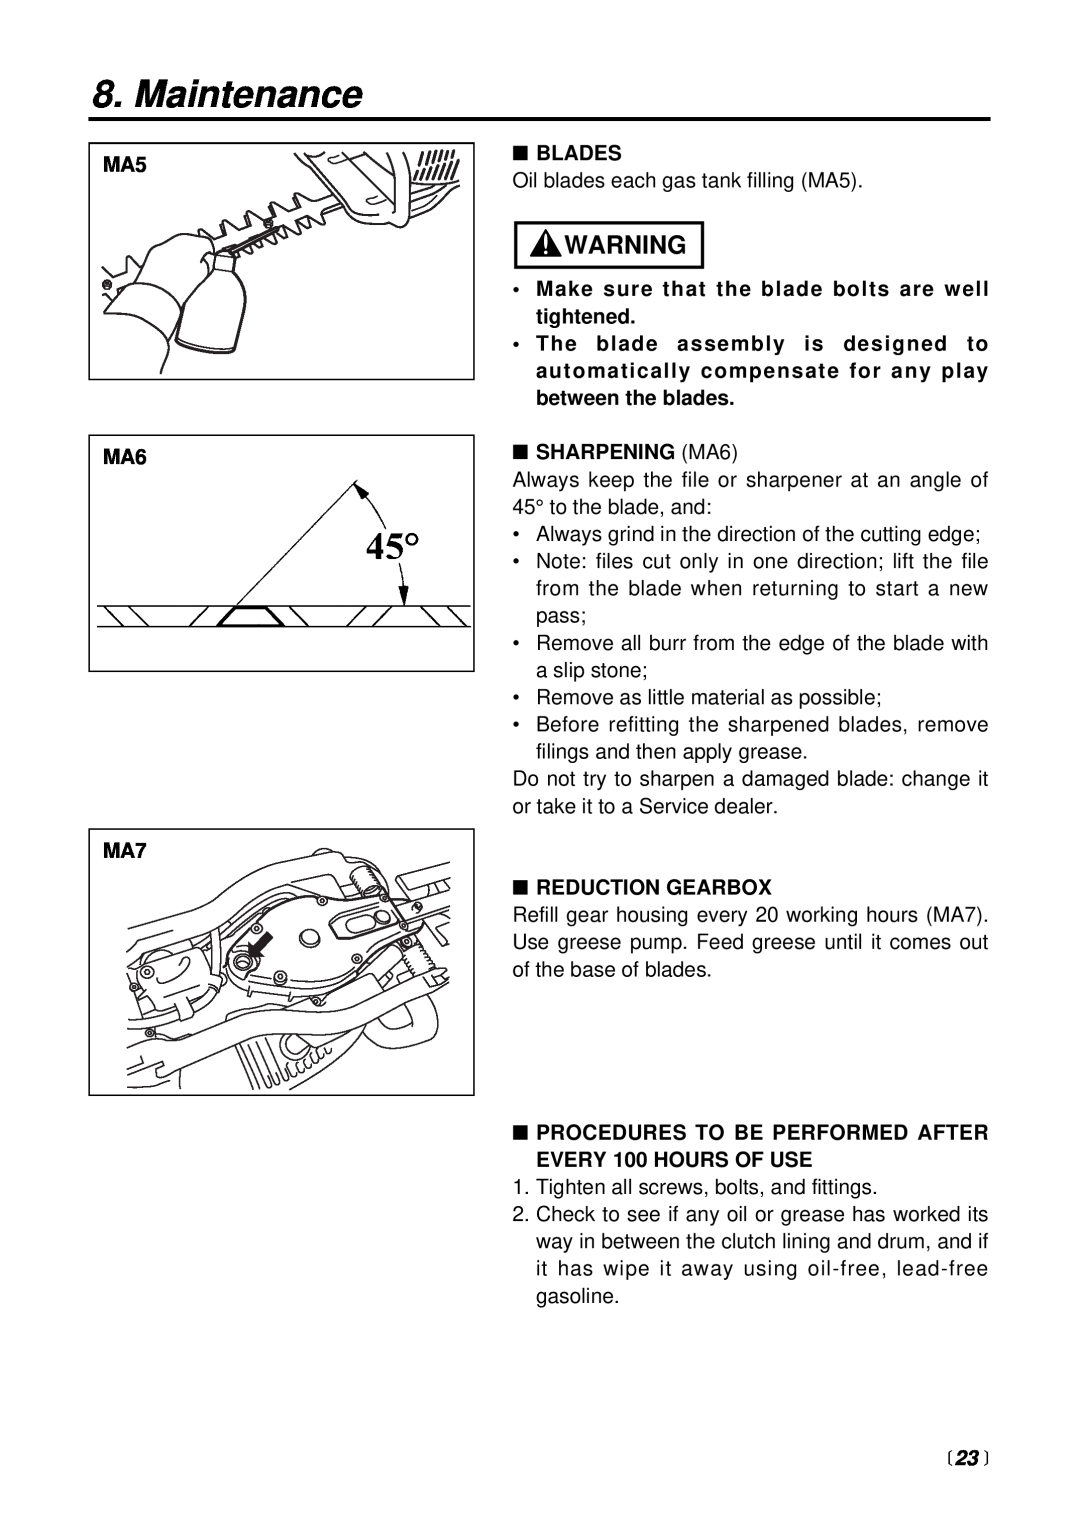 RedMax CHT2301 manual  23 , Maintenance, Blades, Make sure that the blade bolts are well tightened, SHARPENING MA6 